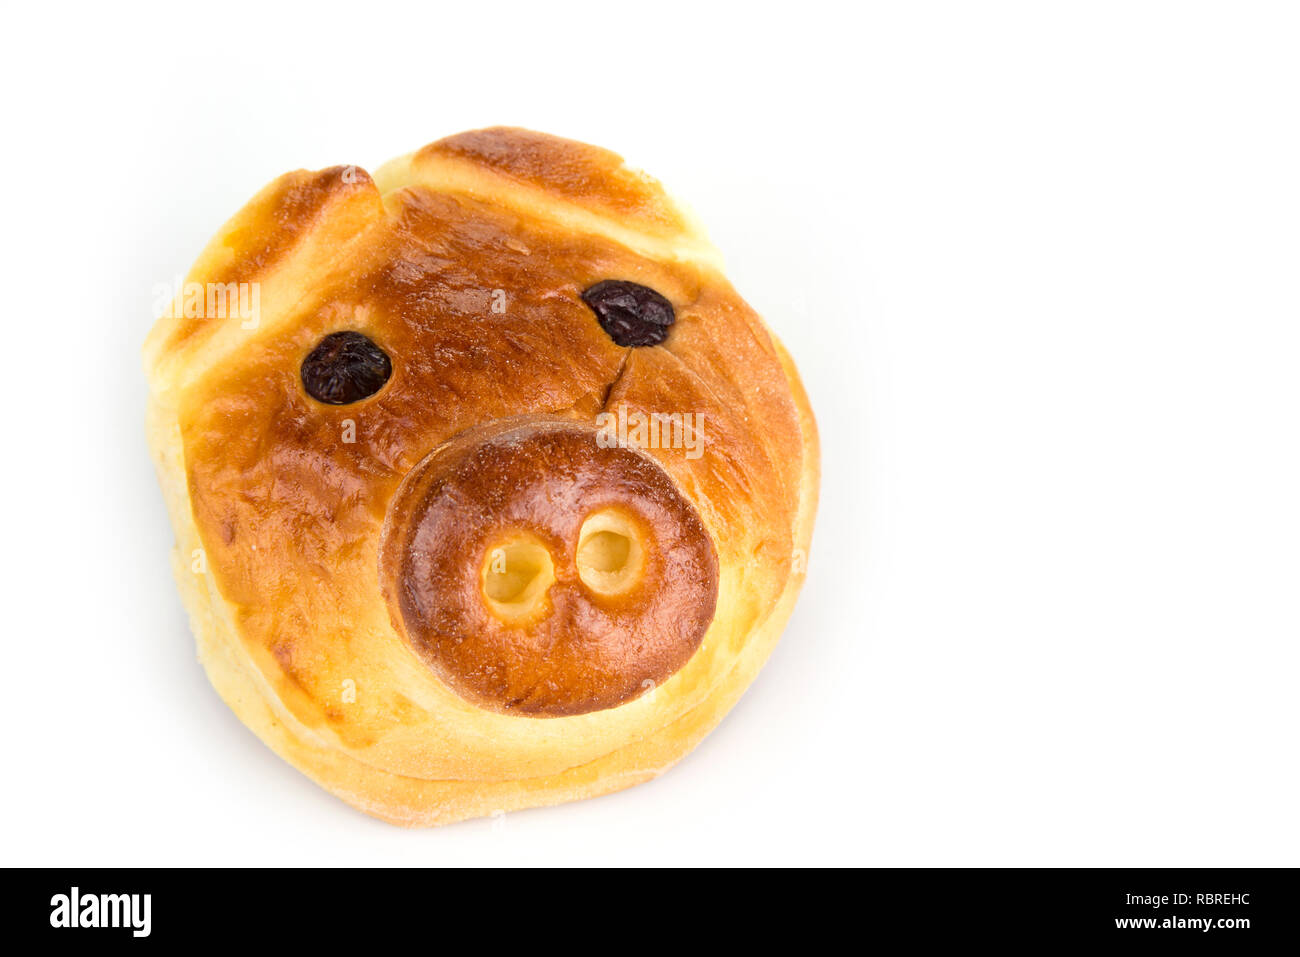 Bun with sweet stuffing in shape of pig head Stock Photo